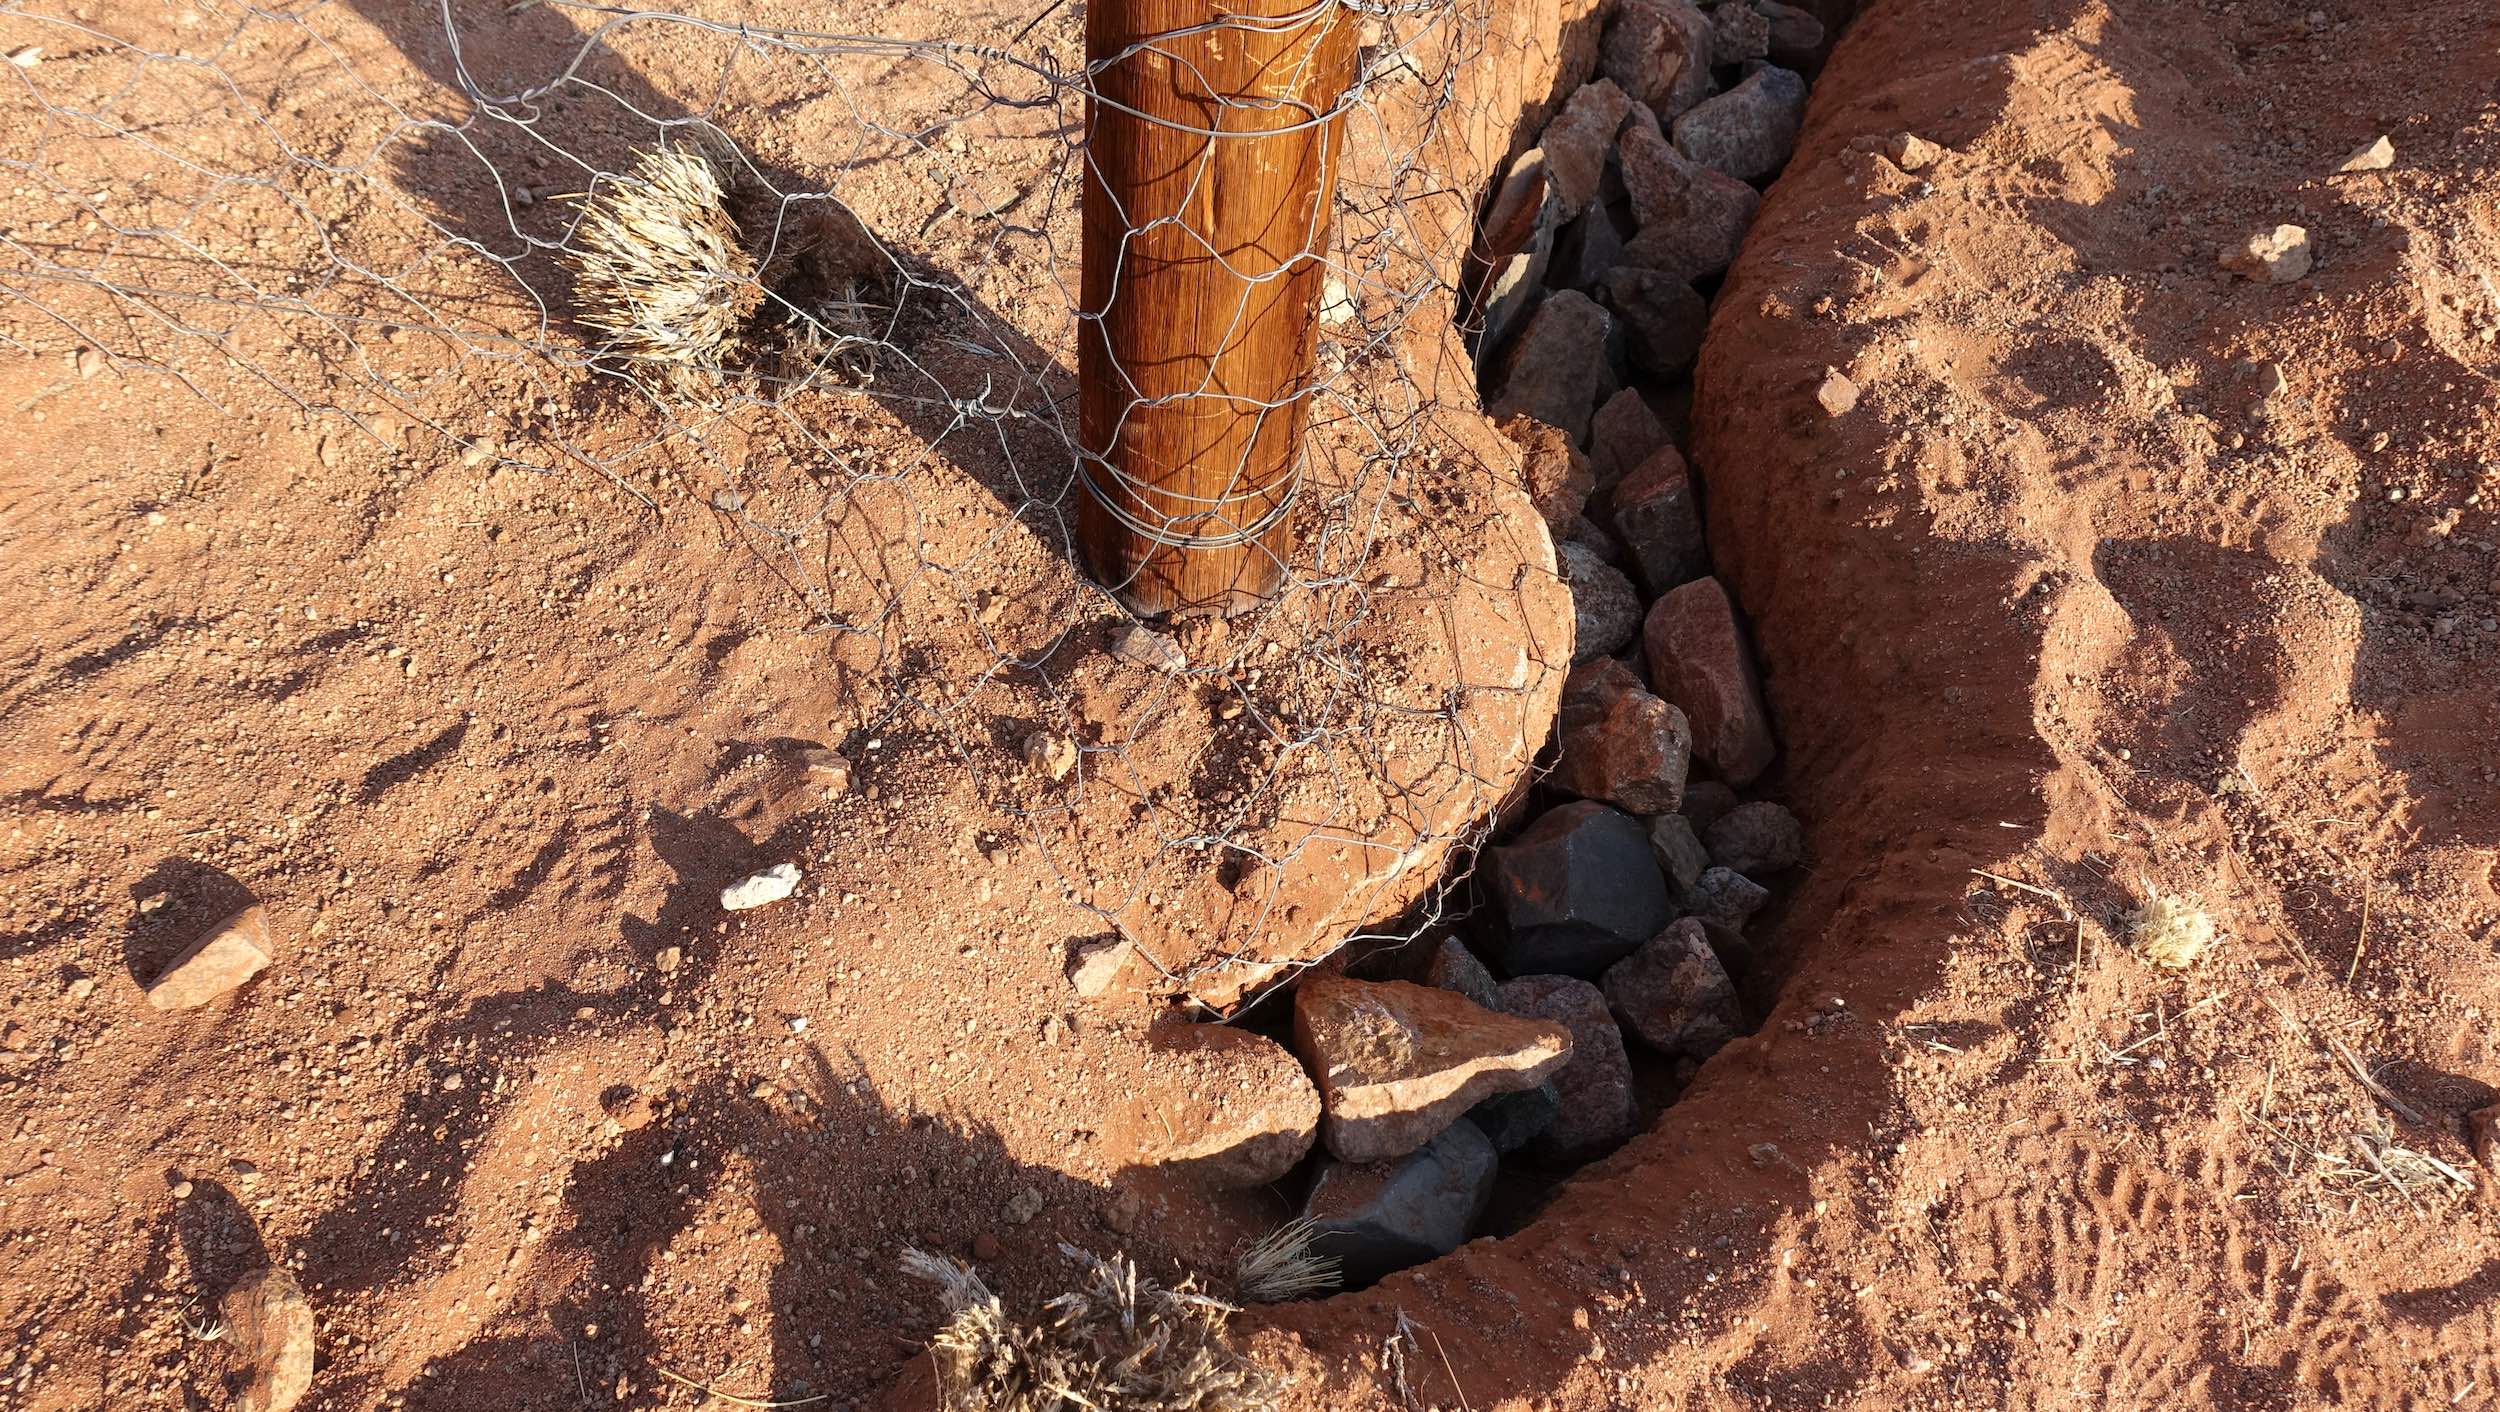 Close-up view of a fence and post embedded deep in the ground, and rocks used to ensure predators cannot dig underneath.